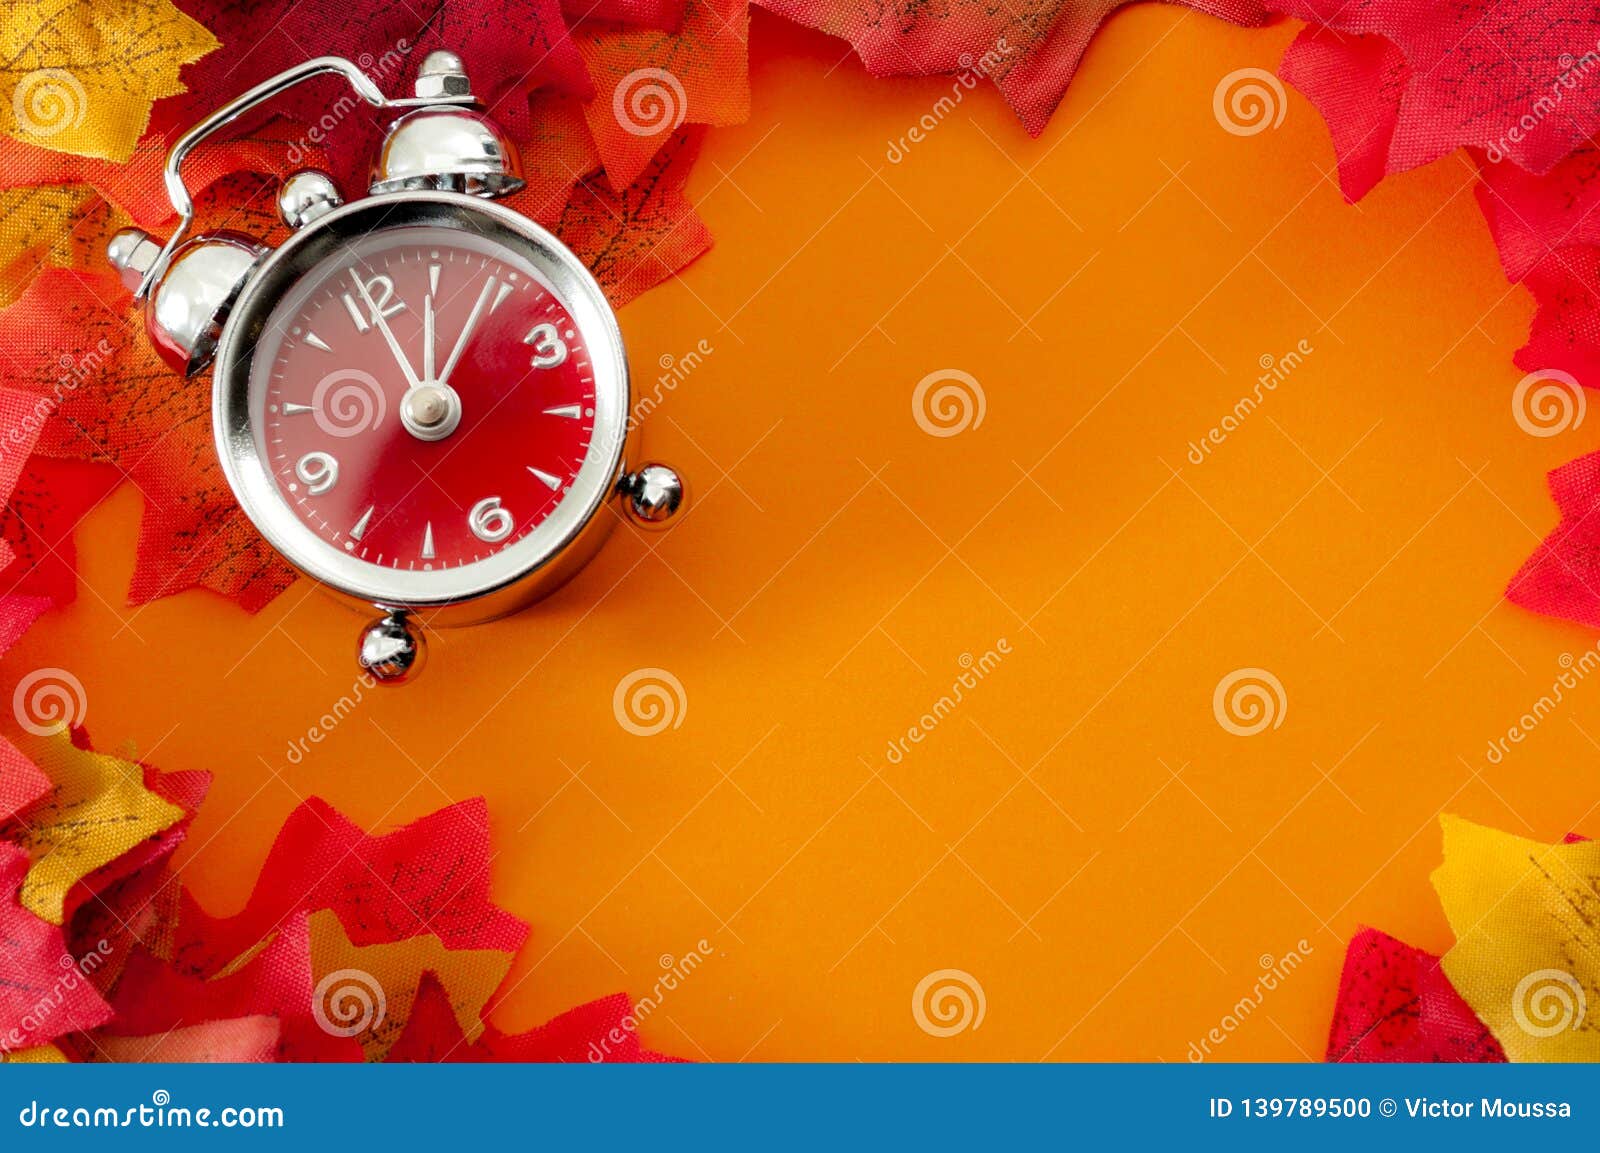 fall back, the end of daylight savings time and turn clocks back on hour concept with a clock surrounded by dried yellow leaves